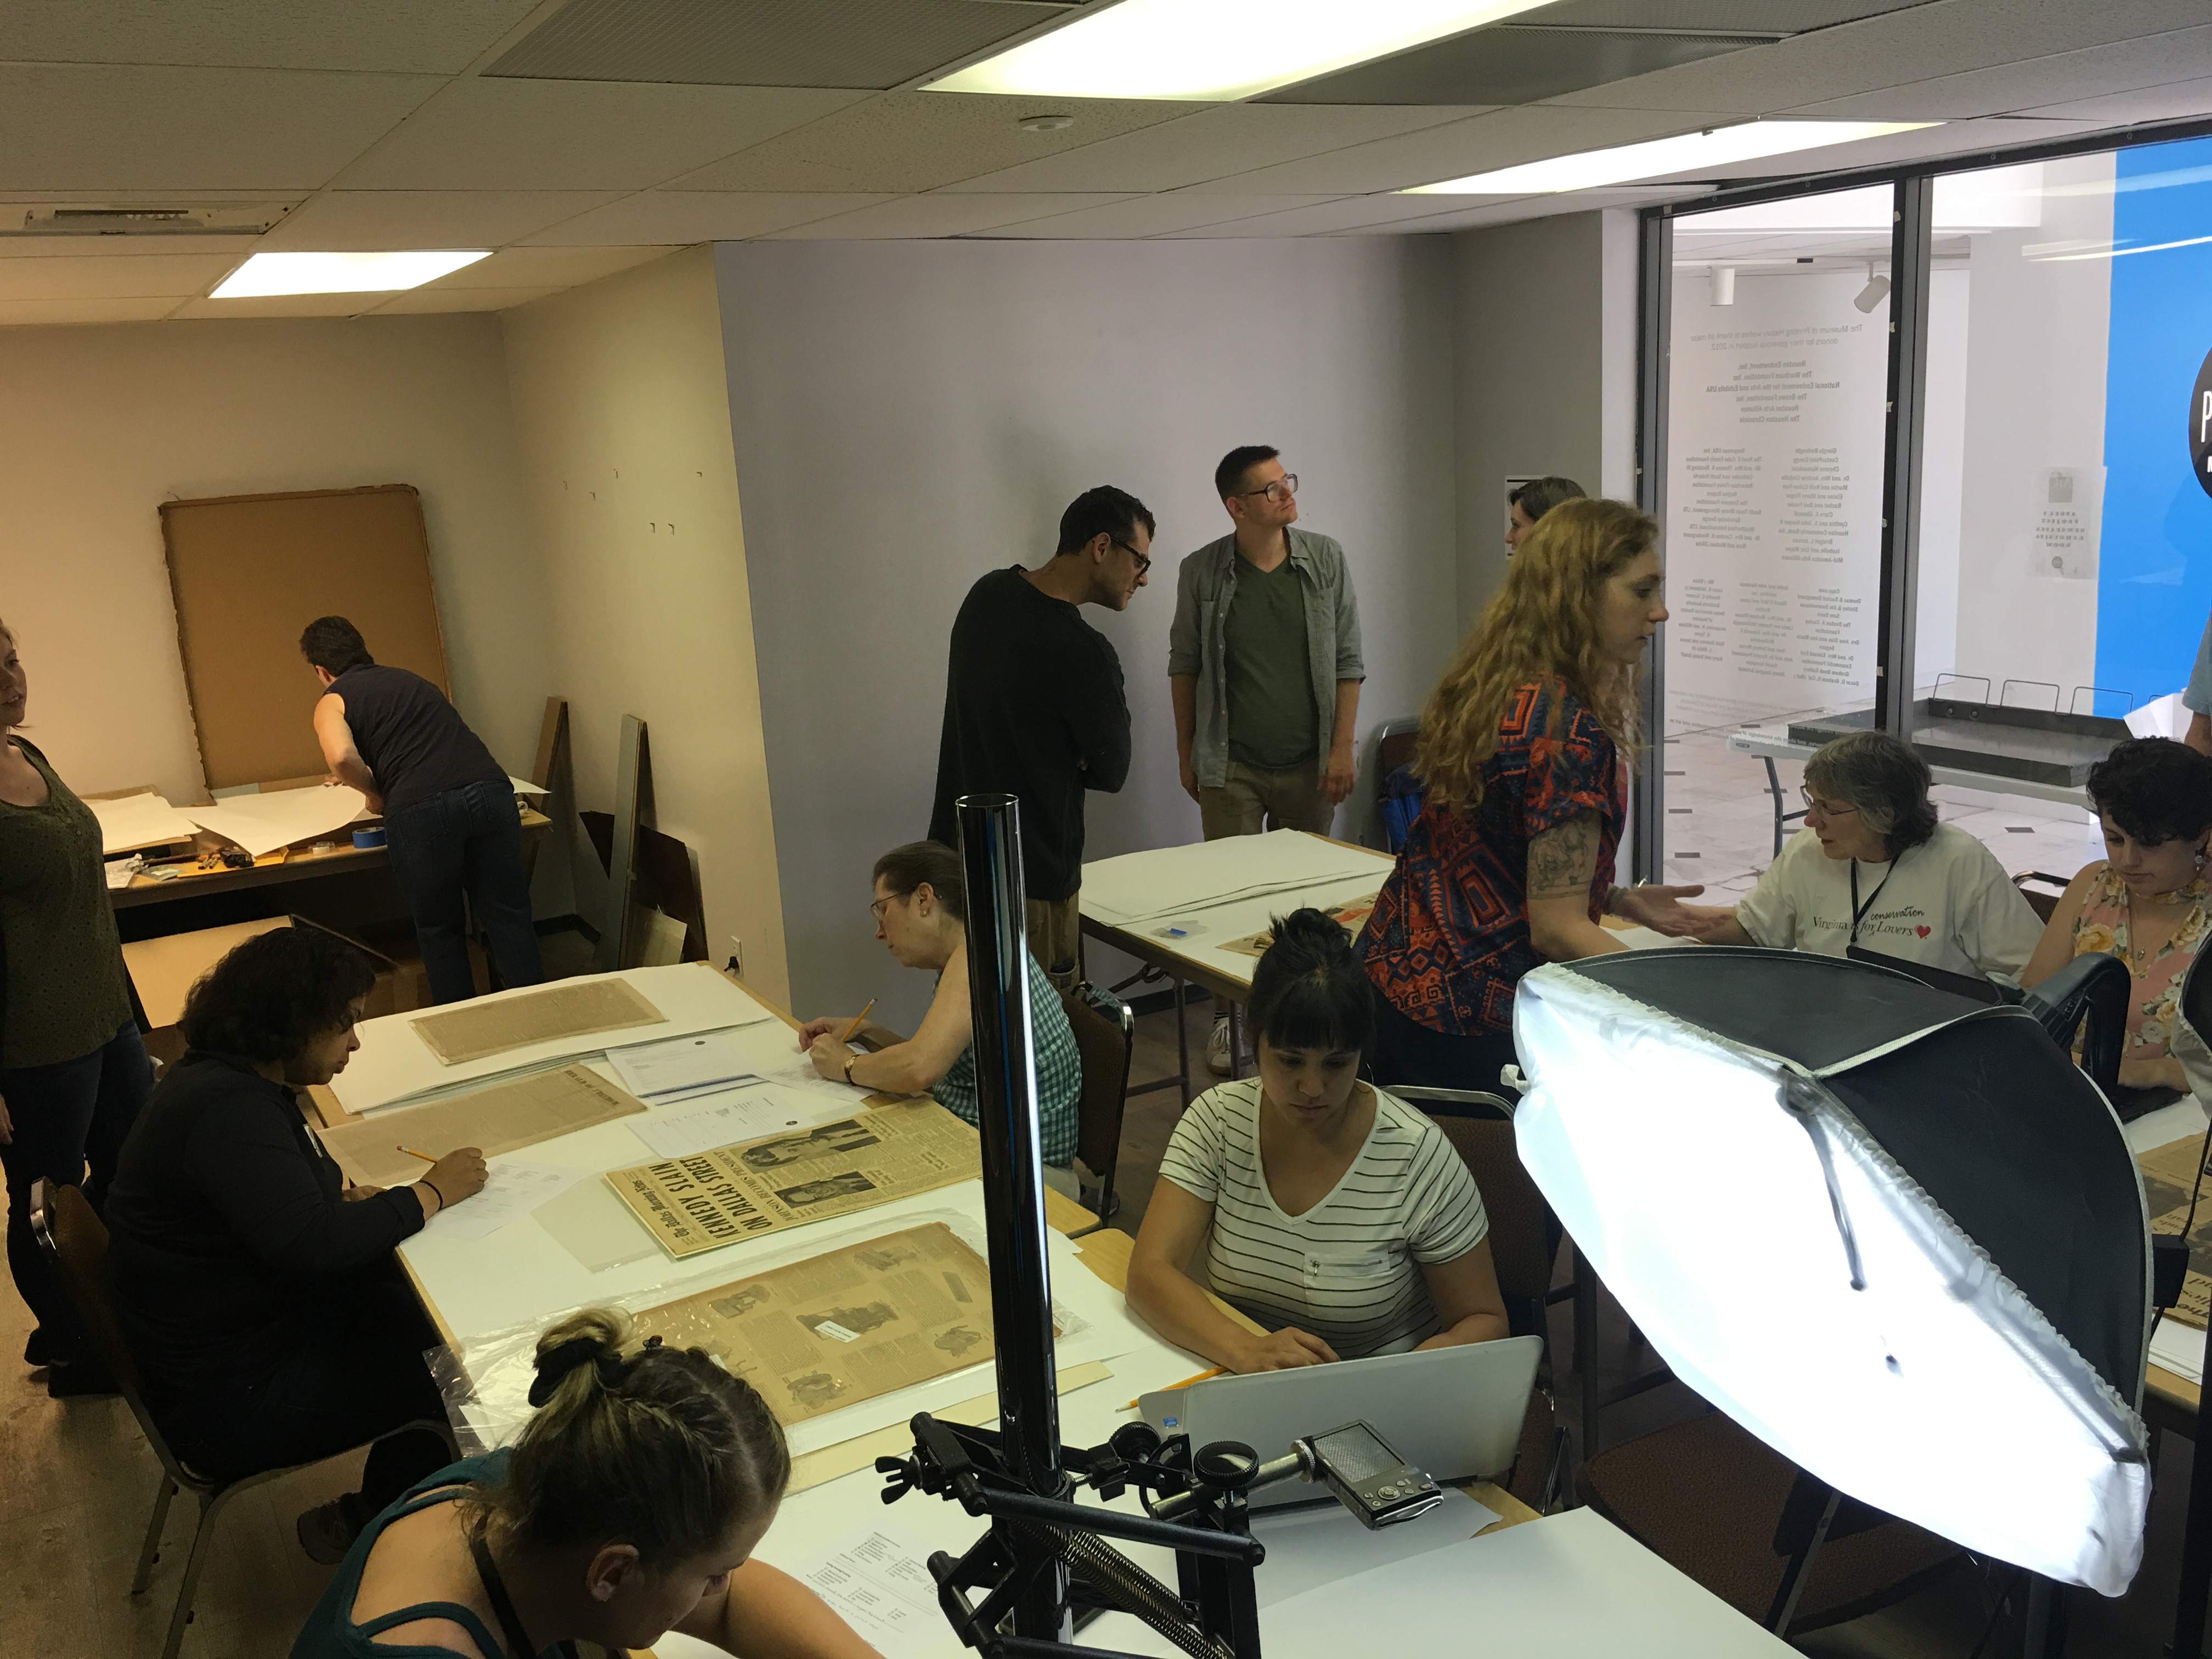 a small group works to document a collection of old newspapers